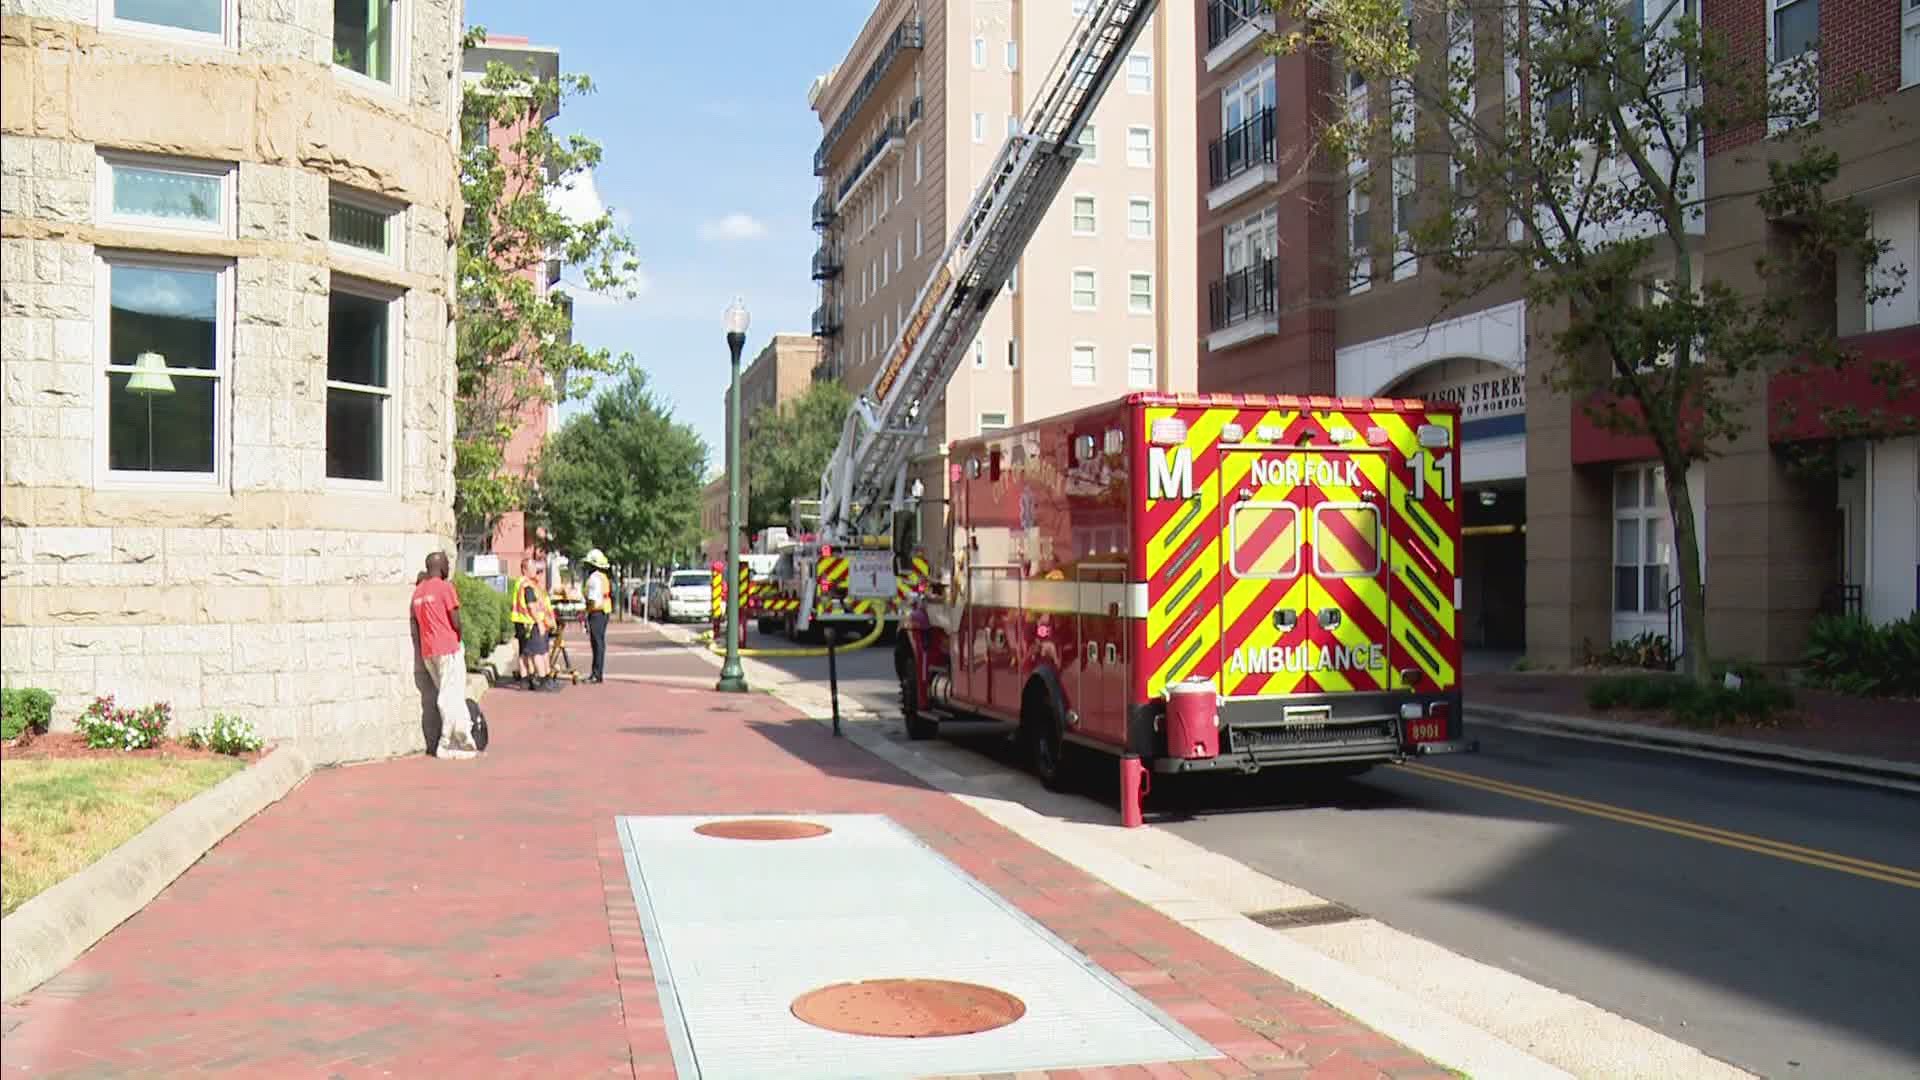 Firefighters battled flames that broke out right on top of a condominium building on Boush Street in downtown Norfolk.